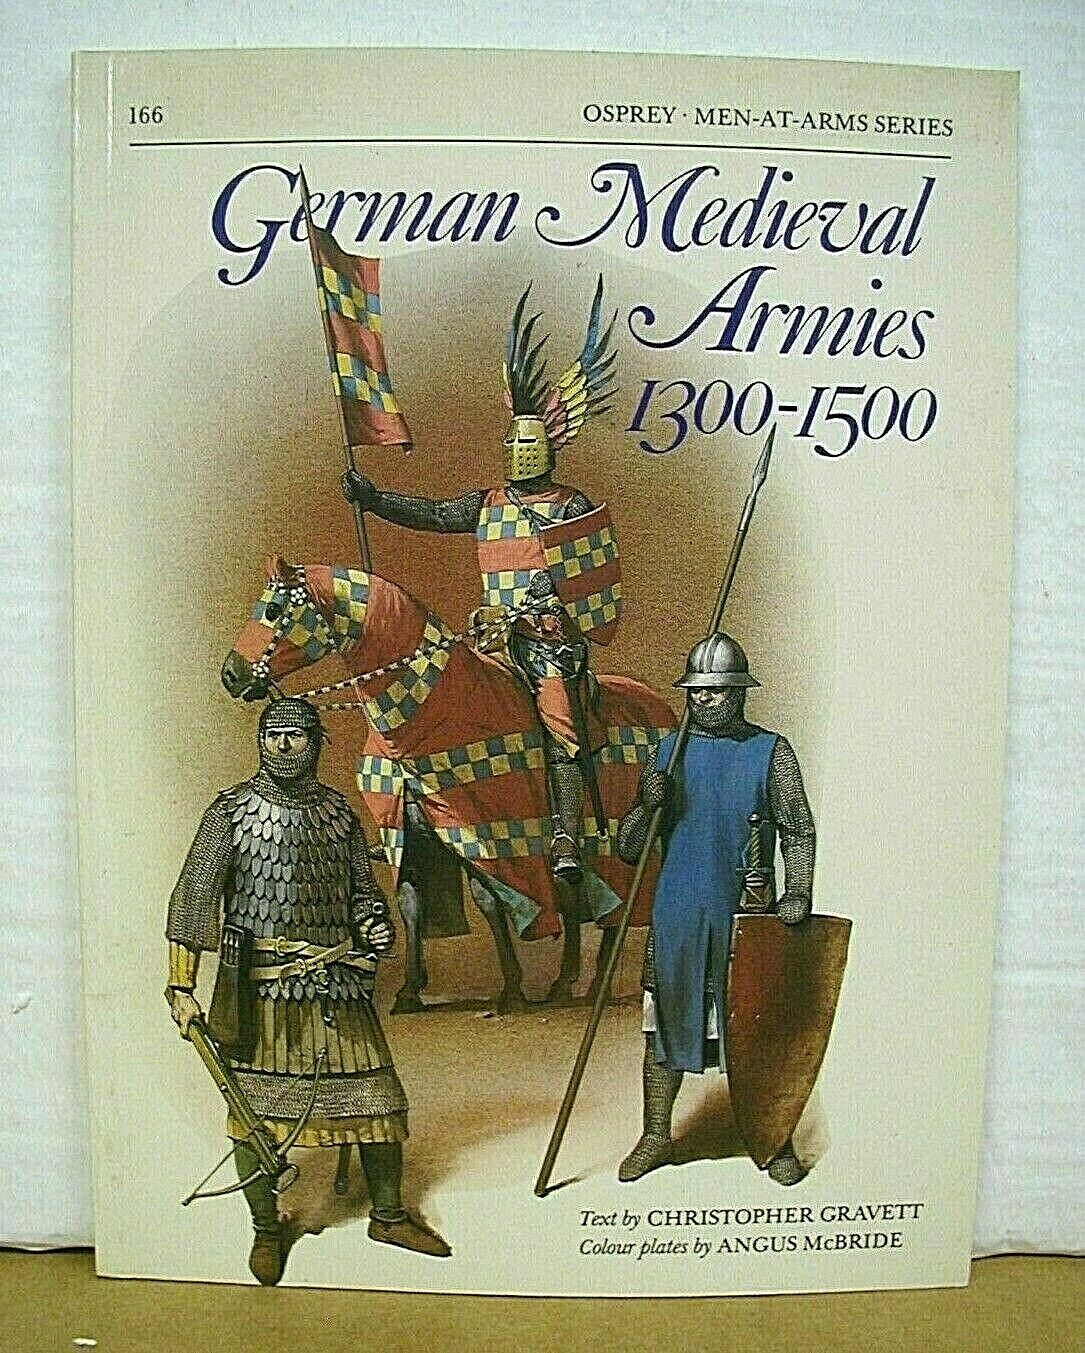 German Medieval Armies 1300-1500 by Christopher Gravett & color by Angus McBride